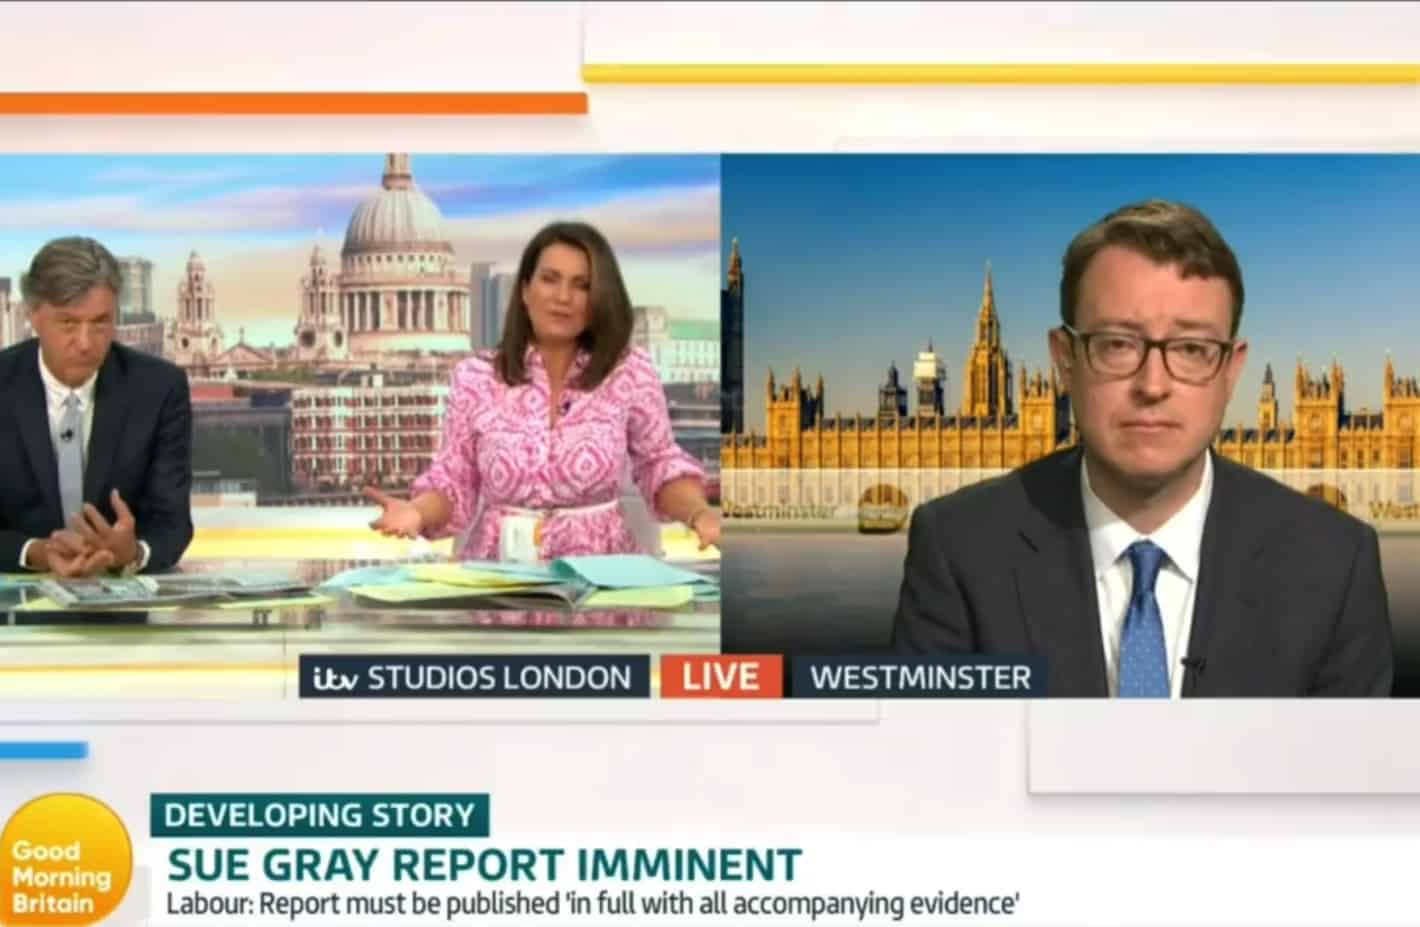 Susanna Reid on fire as she grills Tory MP over PM’s lawbreaking activities